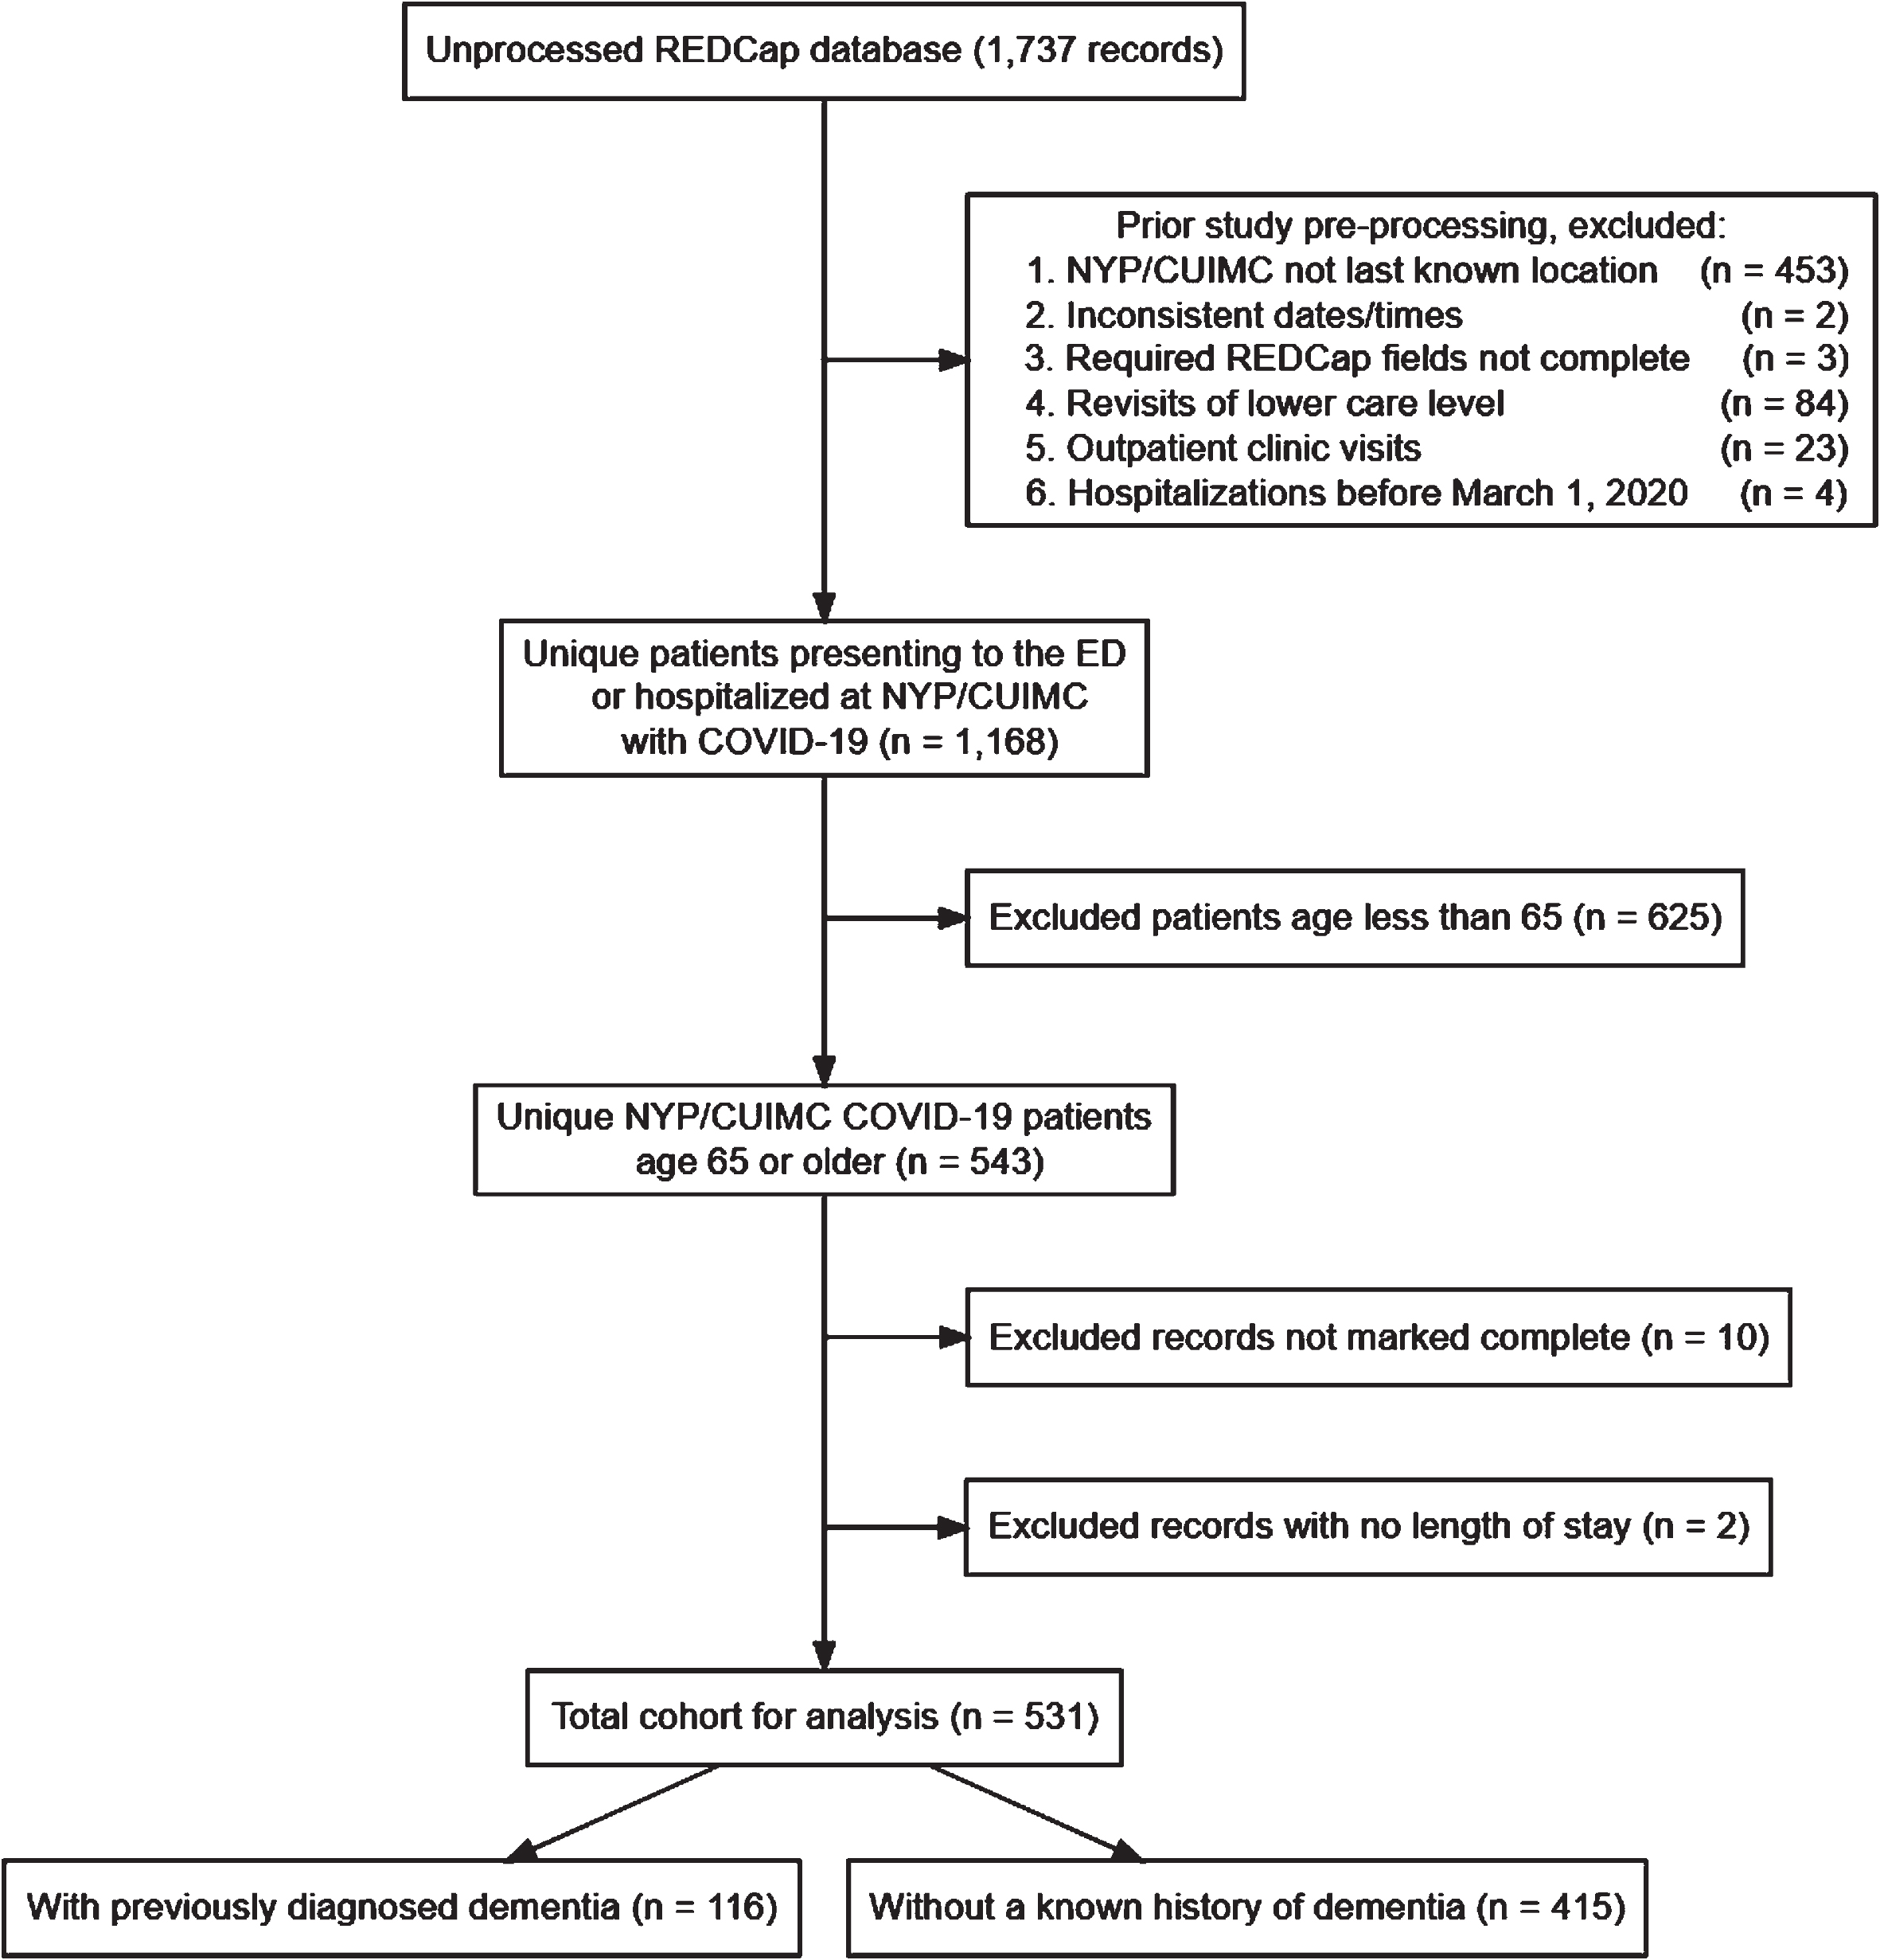 STROBE Flowchart of Study Sample Selection. Selection of the study sample is presented in a flowchart. The steps from “Unprocessed REDCap database (1,737 records)” to “Unique patients presenting to the ED or hospitalized at NYP/CUIMC with COVID-19 (n = 1,168)” were performed with an R script used in the prior study that created the REDCap database [17]. Additional exclusions were made in this study for patients with a presenting age less than 65, with records not marked “Complete” in REDCap, and with missing values for length of stay.